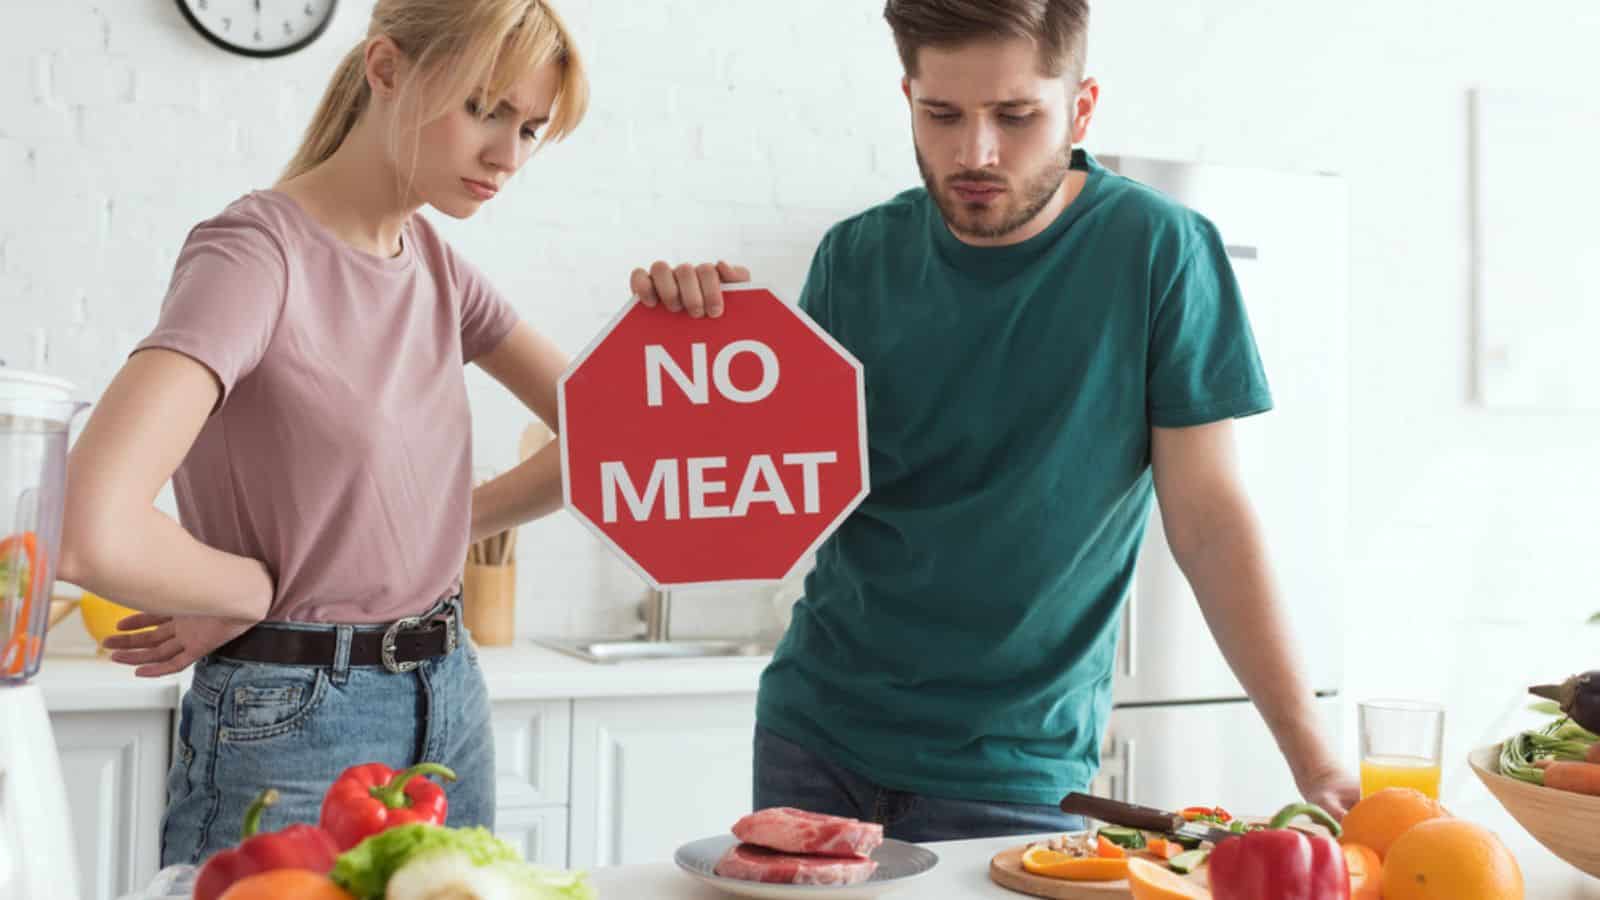 Vegan couple with no meat sign at table with raw meat 